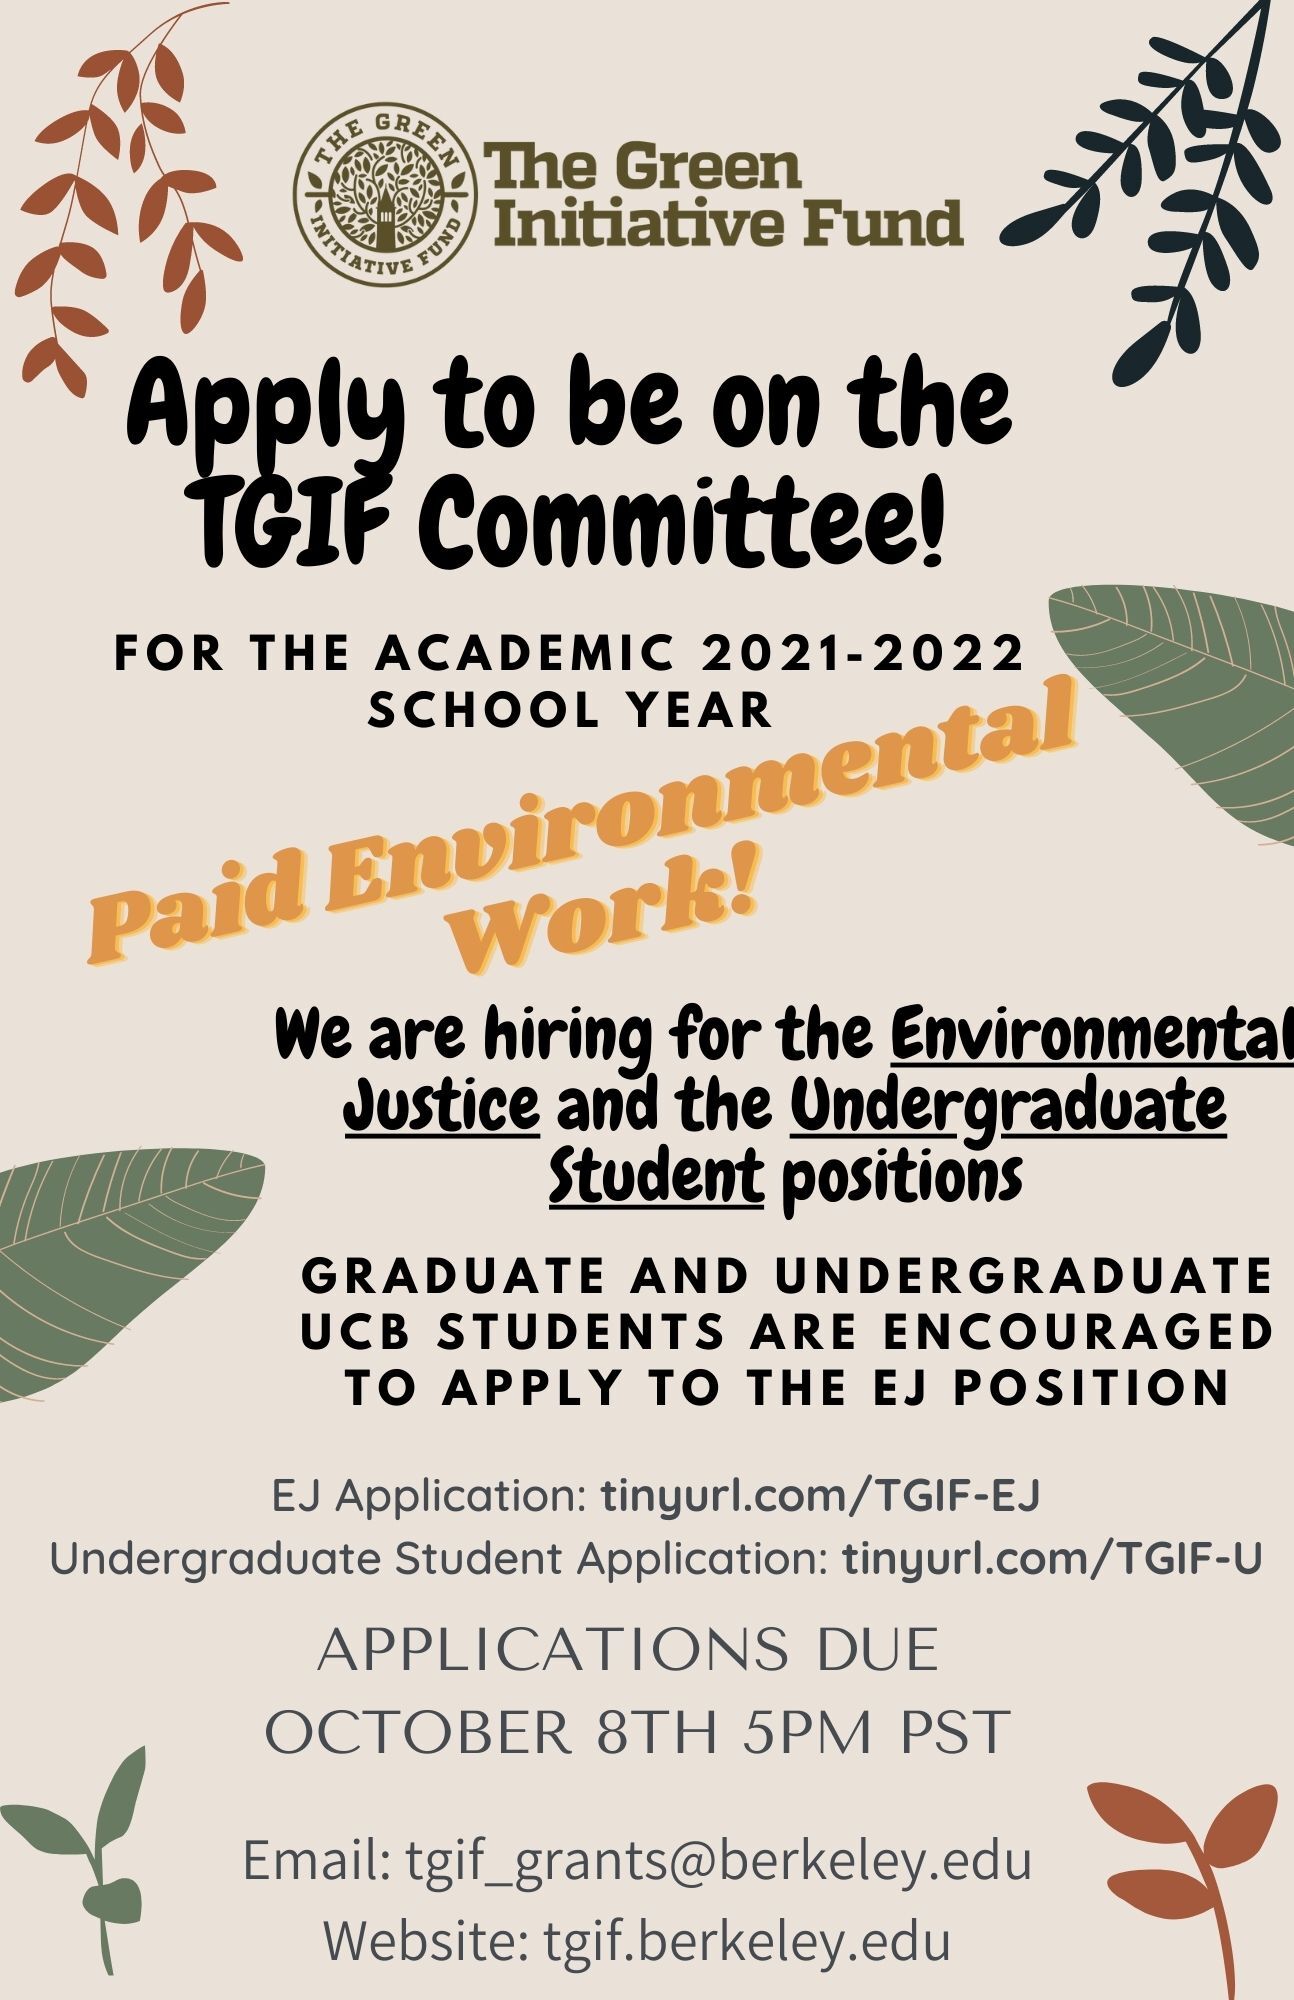 Flyer with information on the TGIF Committee Applications, also provided in plain text nearby.